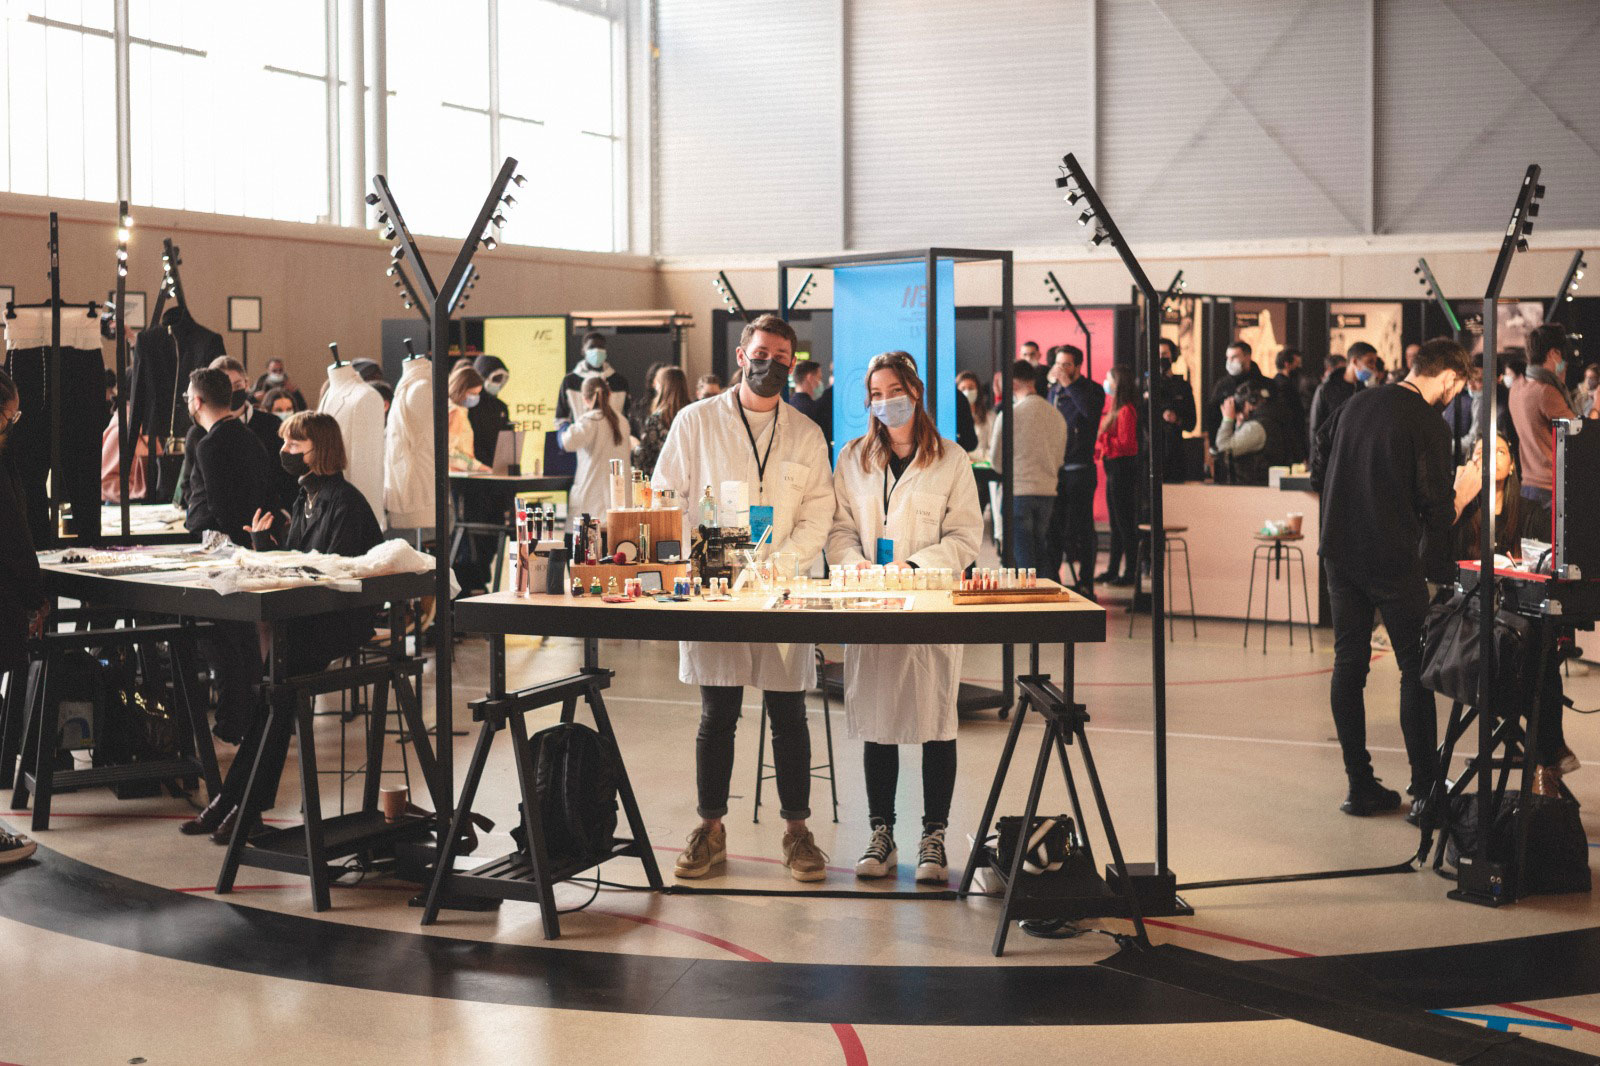 LVMH Institut des Métiers d'Excellence kicks off seventh school year  LVMH  has always made developing professional training and employability for  young people a top priority and a central component of the